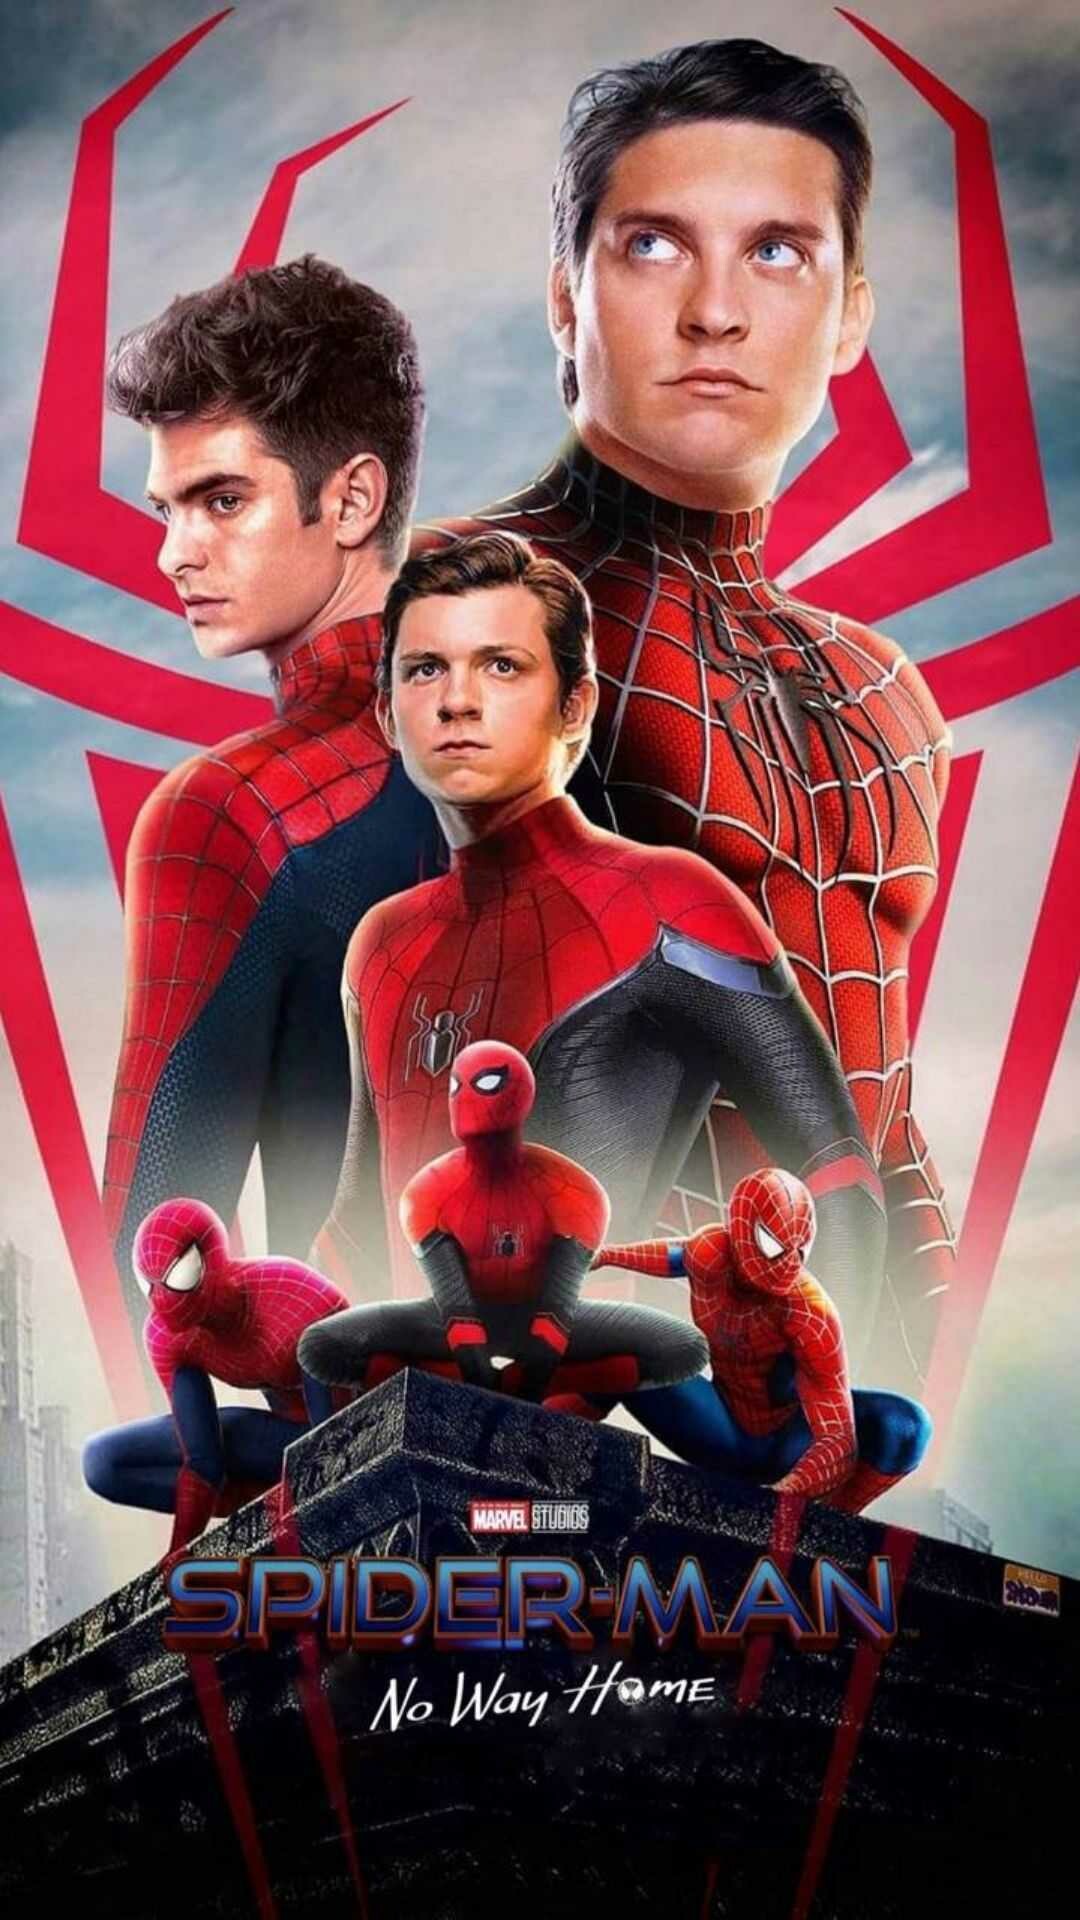 Spider-Man: No Way Home: Tobey Maguire's and Andrew Garfield's return was kept secret by Marvel and Sony. 1080x1920 Full HD Background.